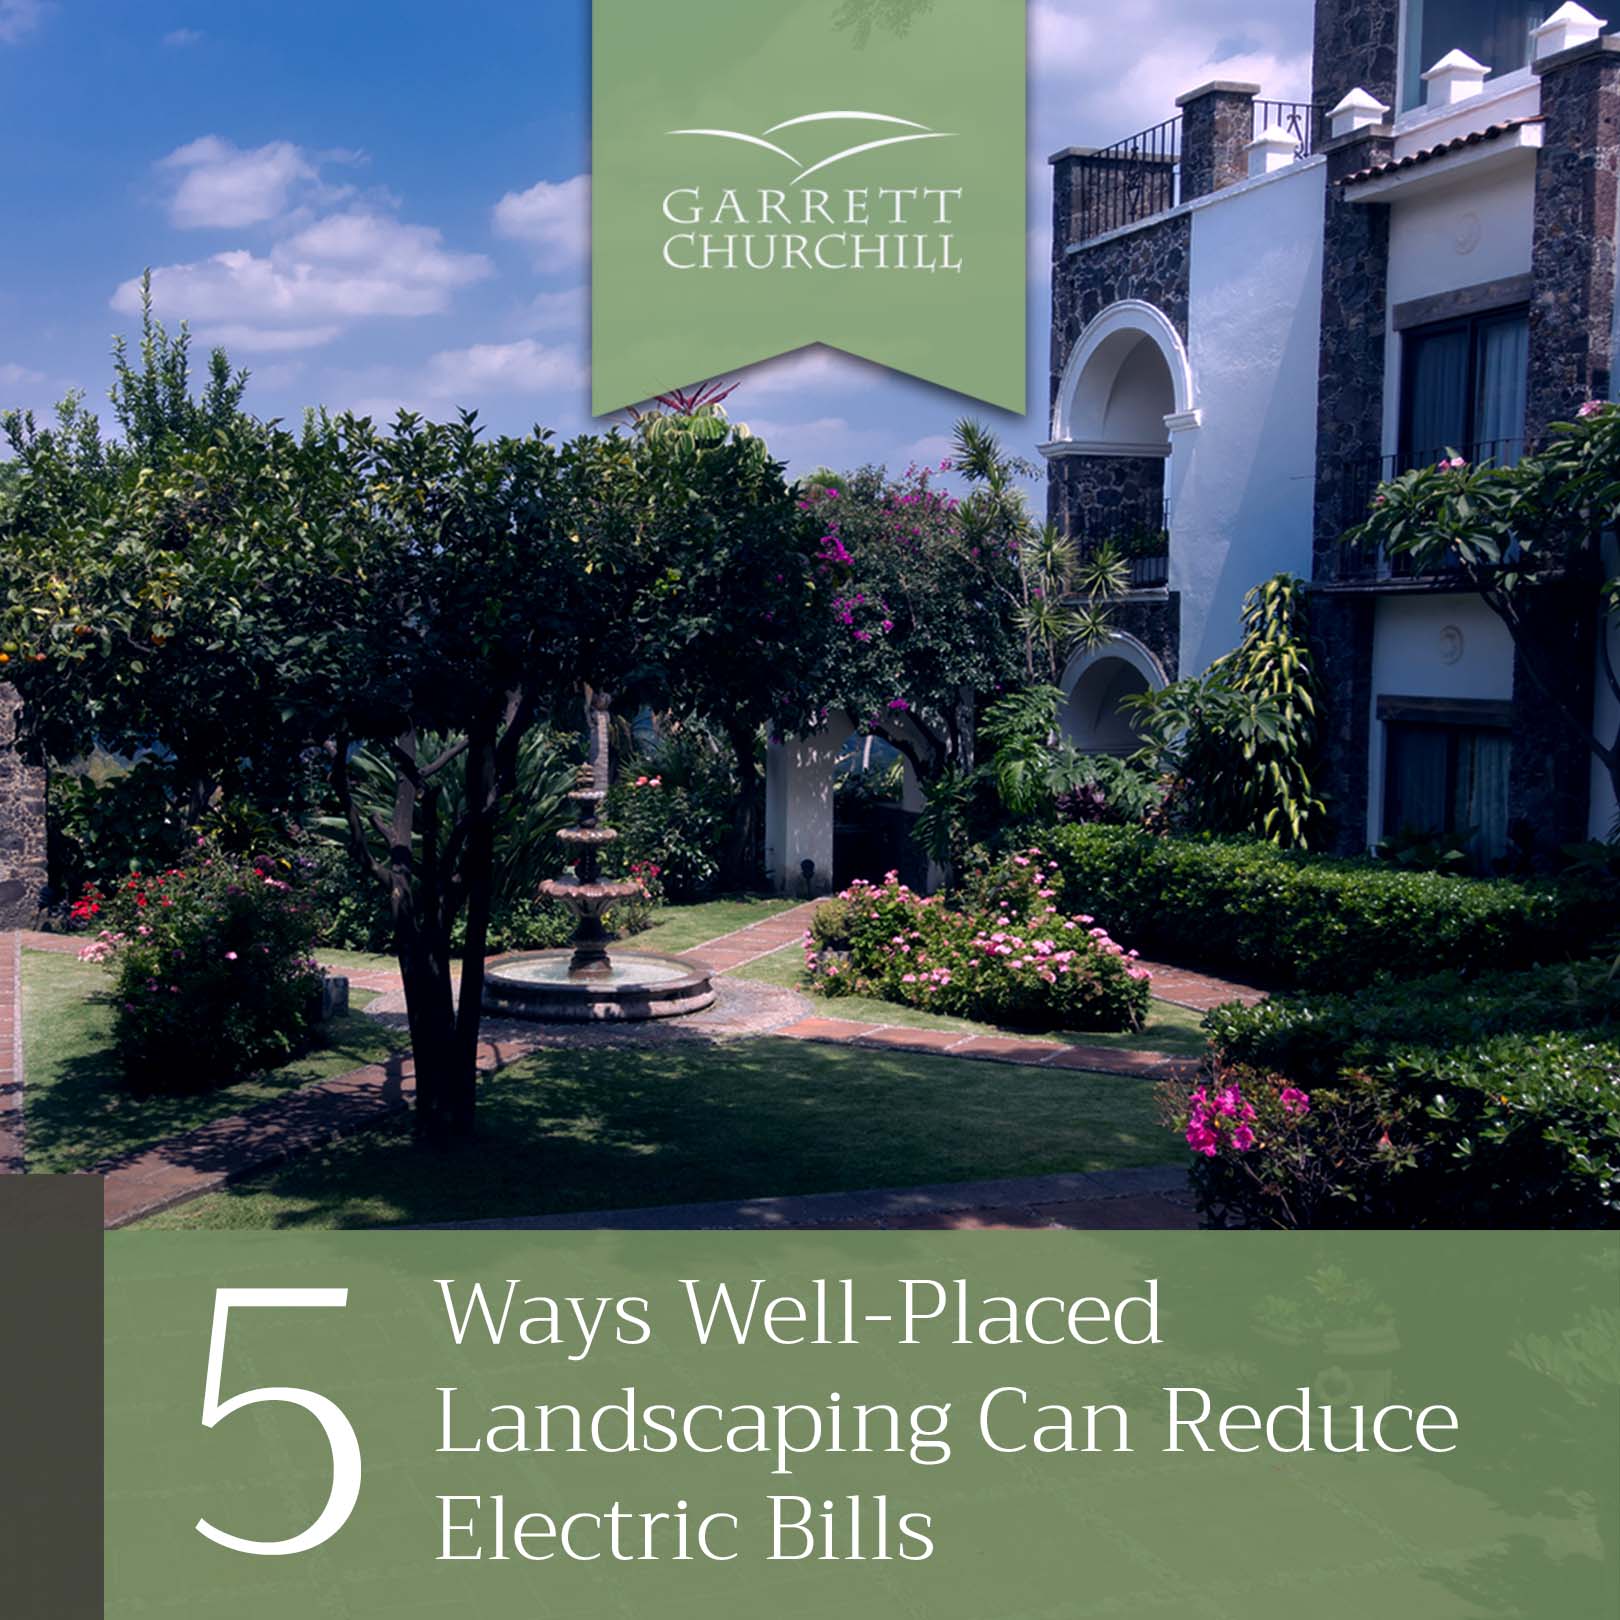 You are currently viewing 5 Ways Well-Placed Landscaping Can Reduce Electric Bills